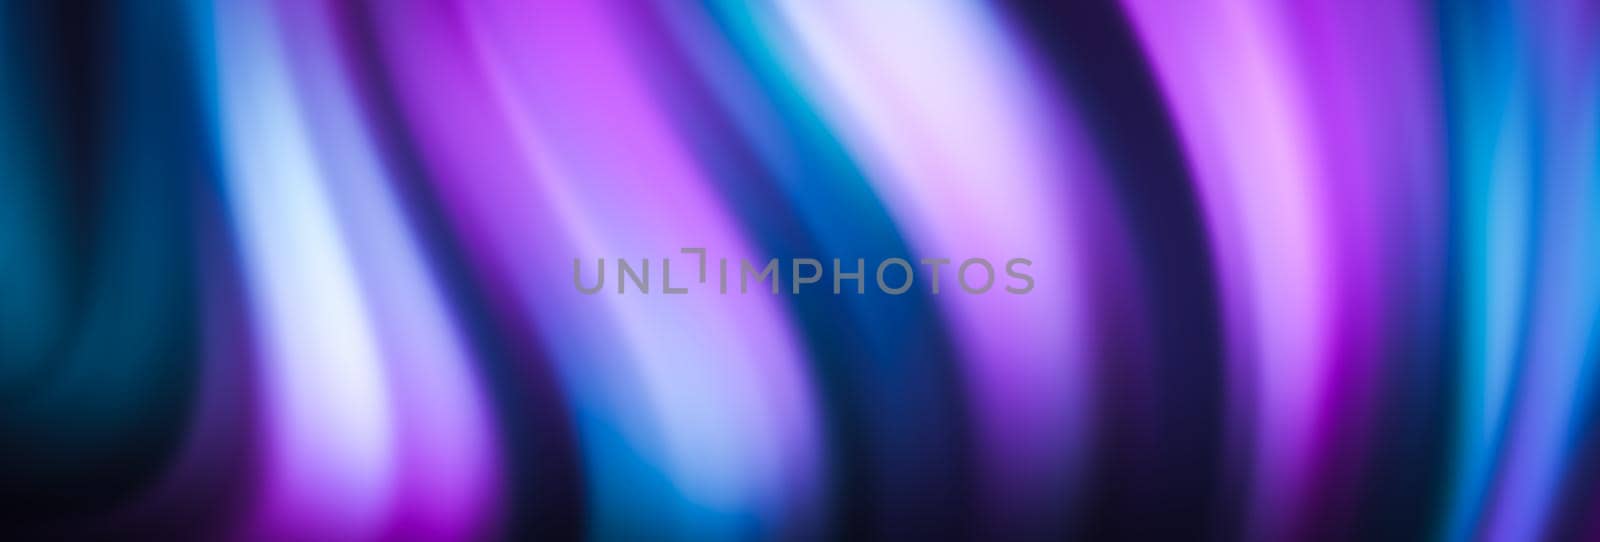 abstract purple wave background shimmers from one color to another wave line